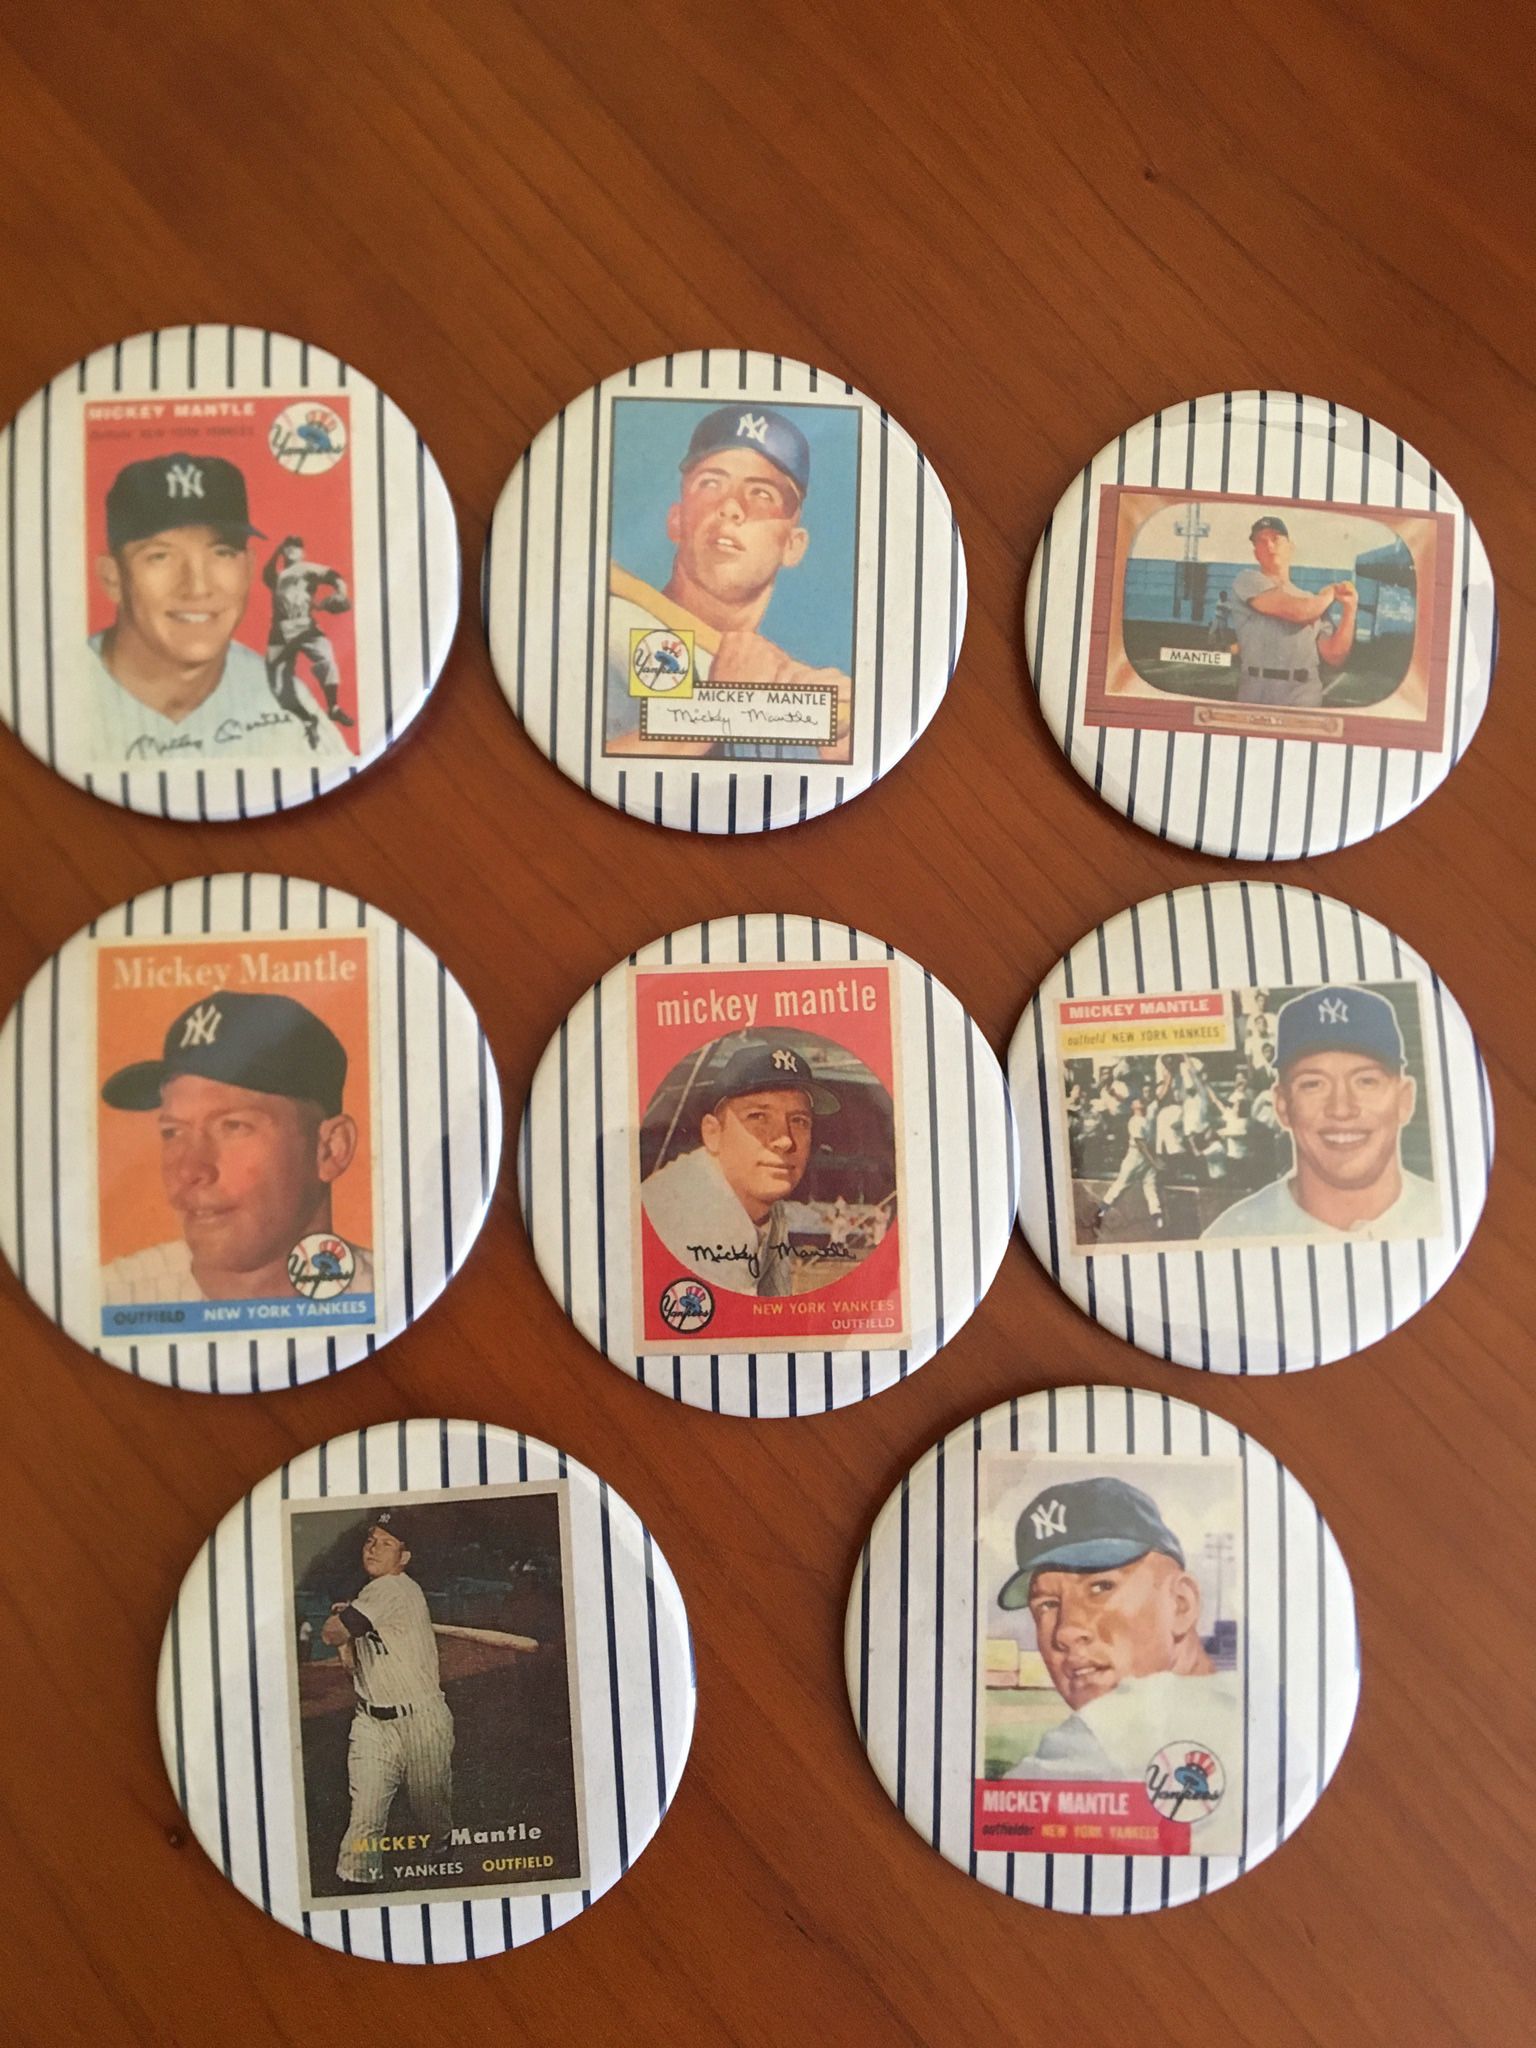 * (8) MICKEY MANTLE * (1950’s) BASEBALL CARDS REPLICA BUTTONS *